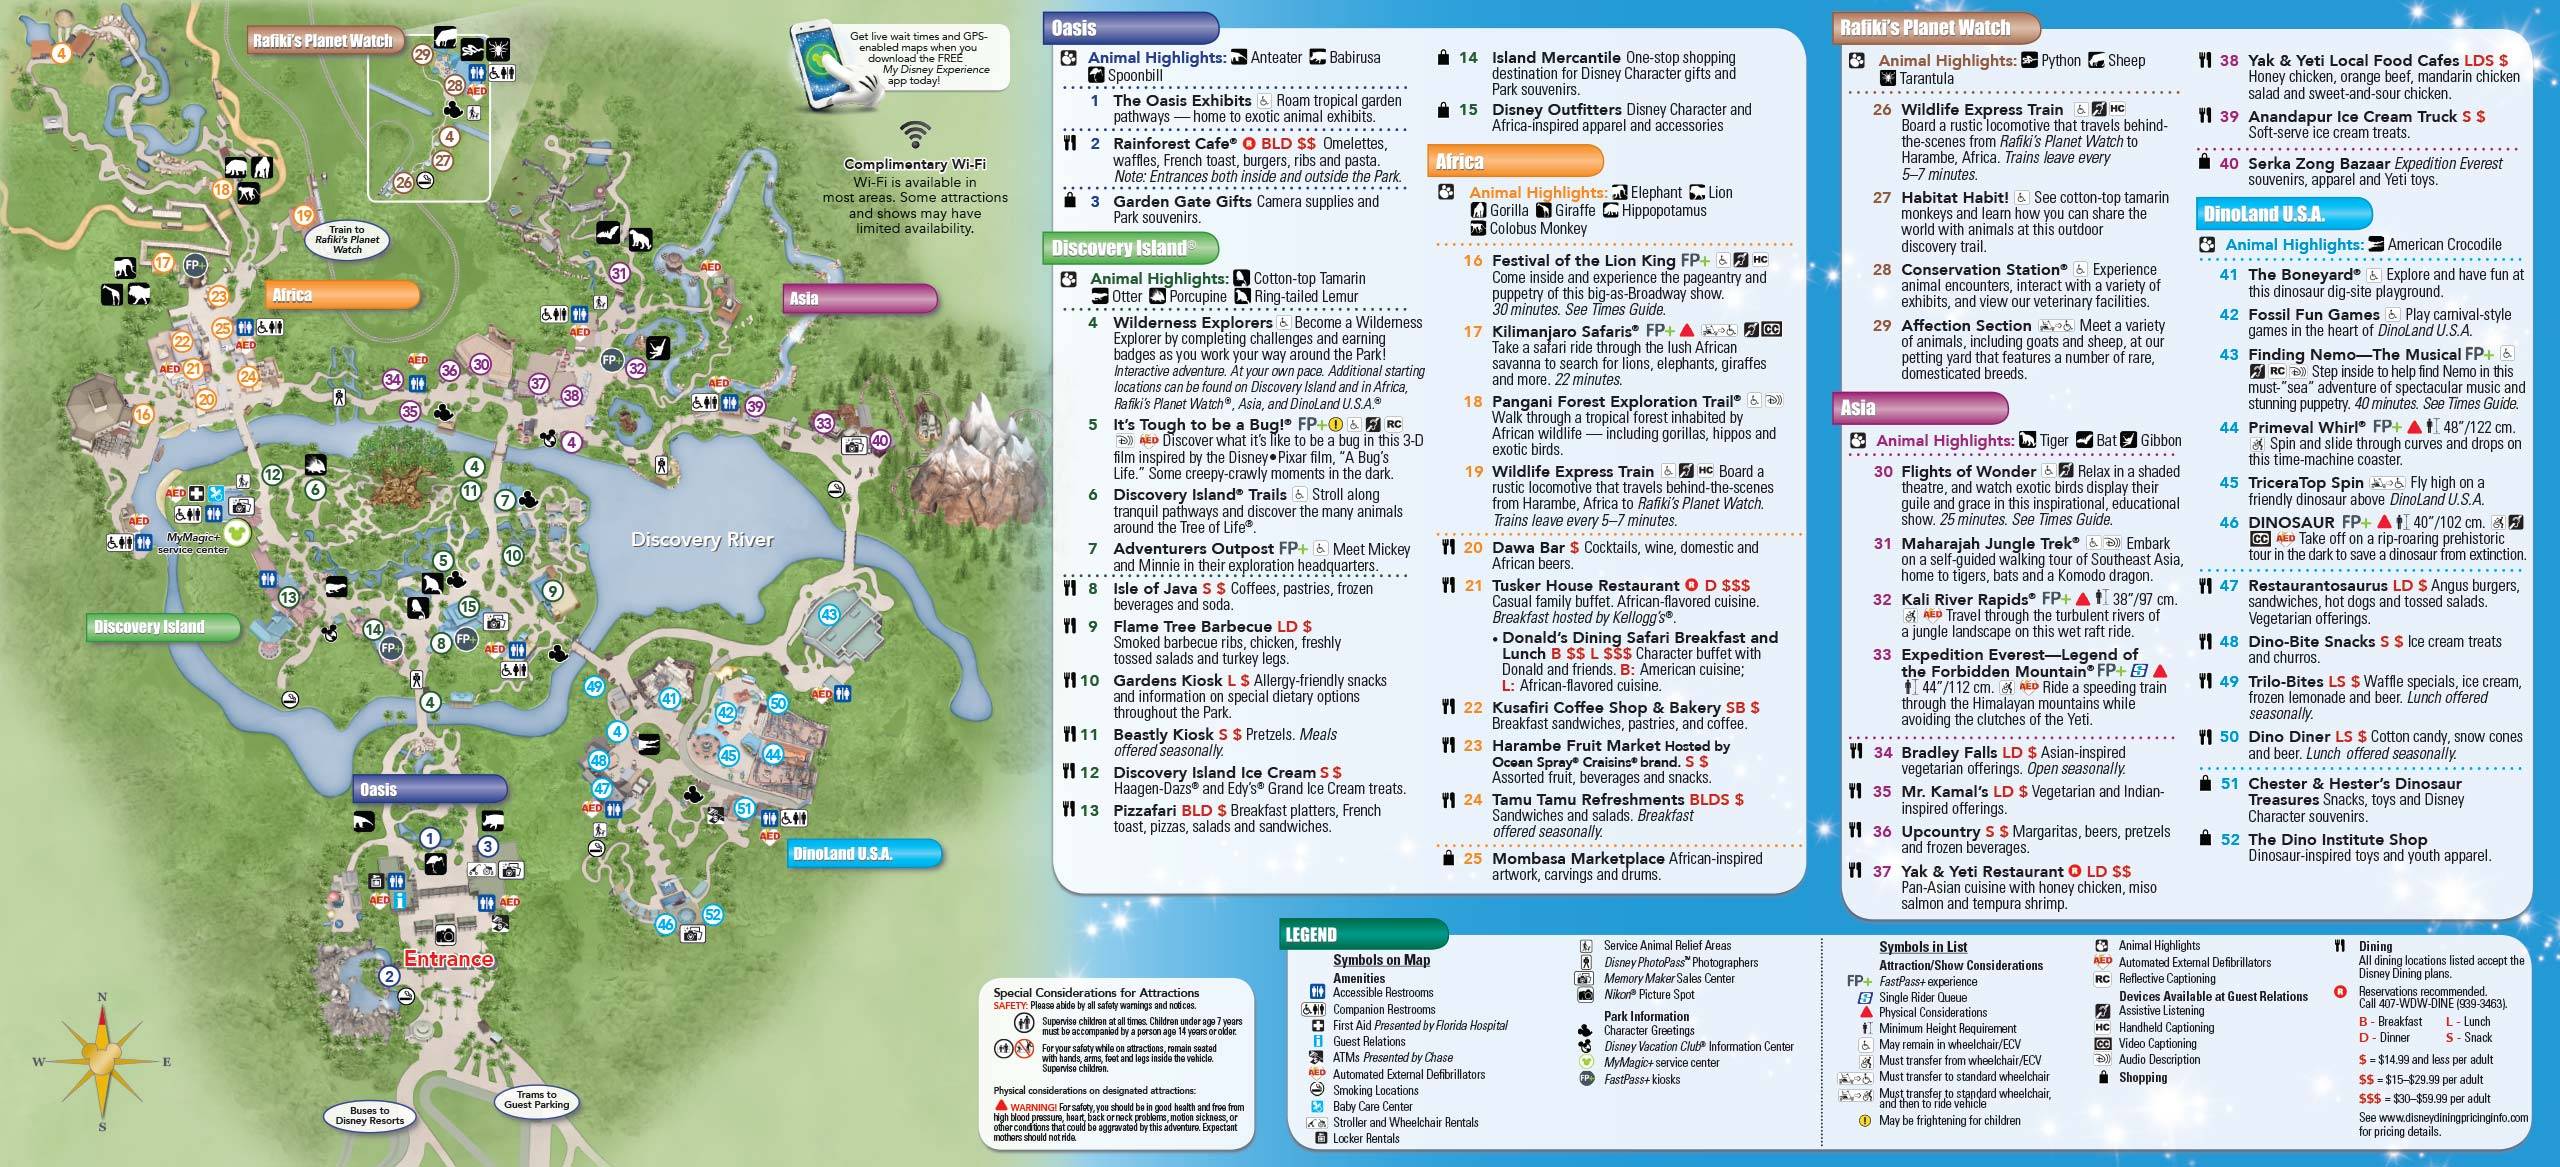 New Disney's Animal Kingdom Park Guide Map with Harambe Theater District addition - back